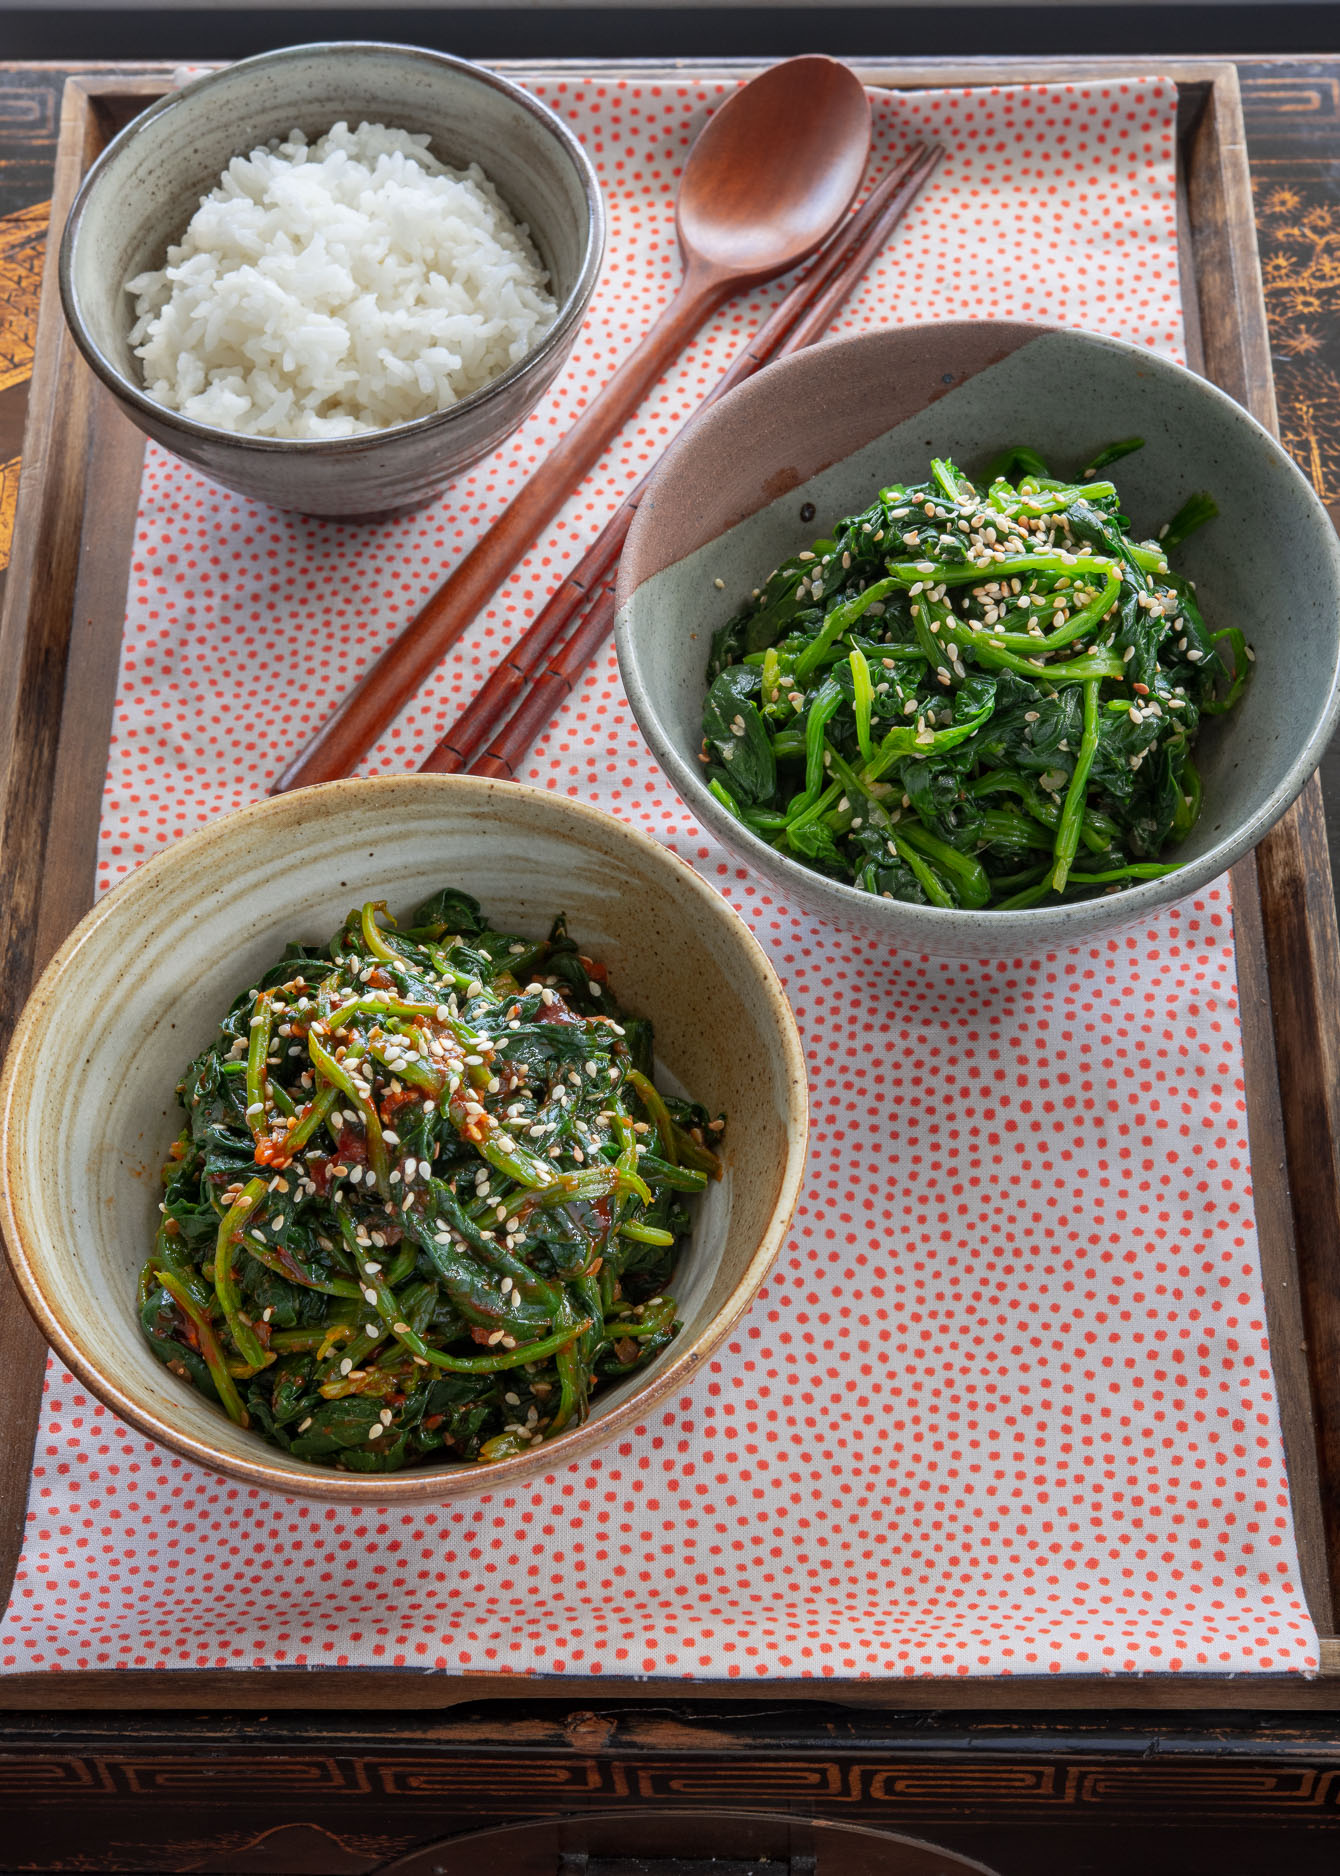 Two Korean spinach side dish (Spinach banchan) served with rice on a tray.